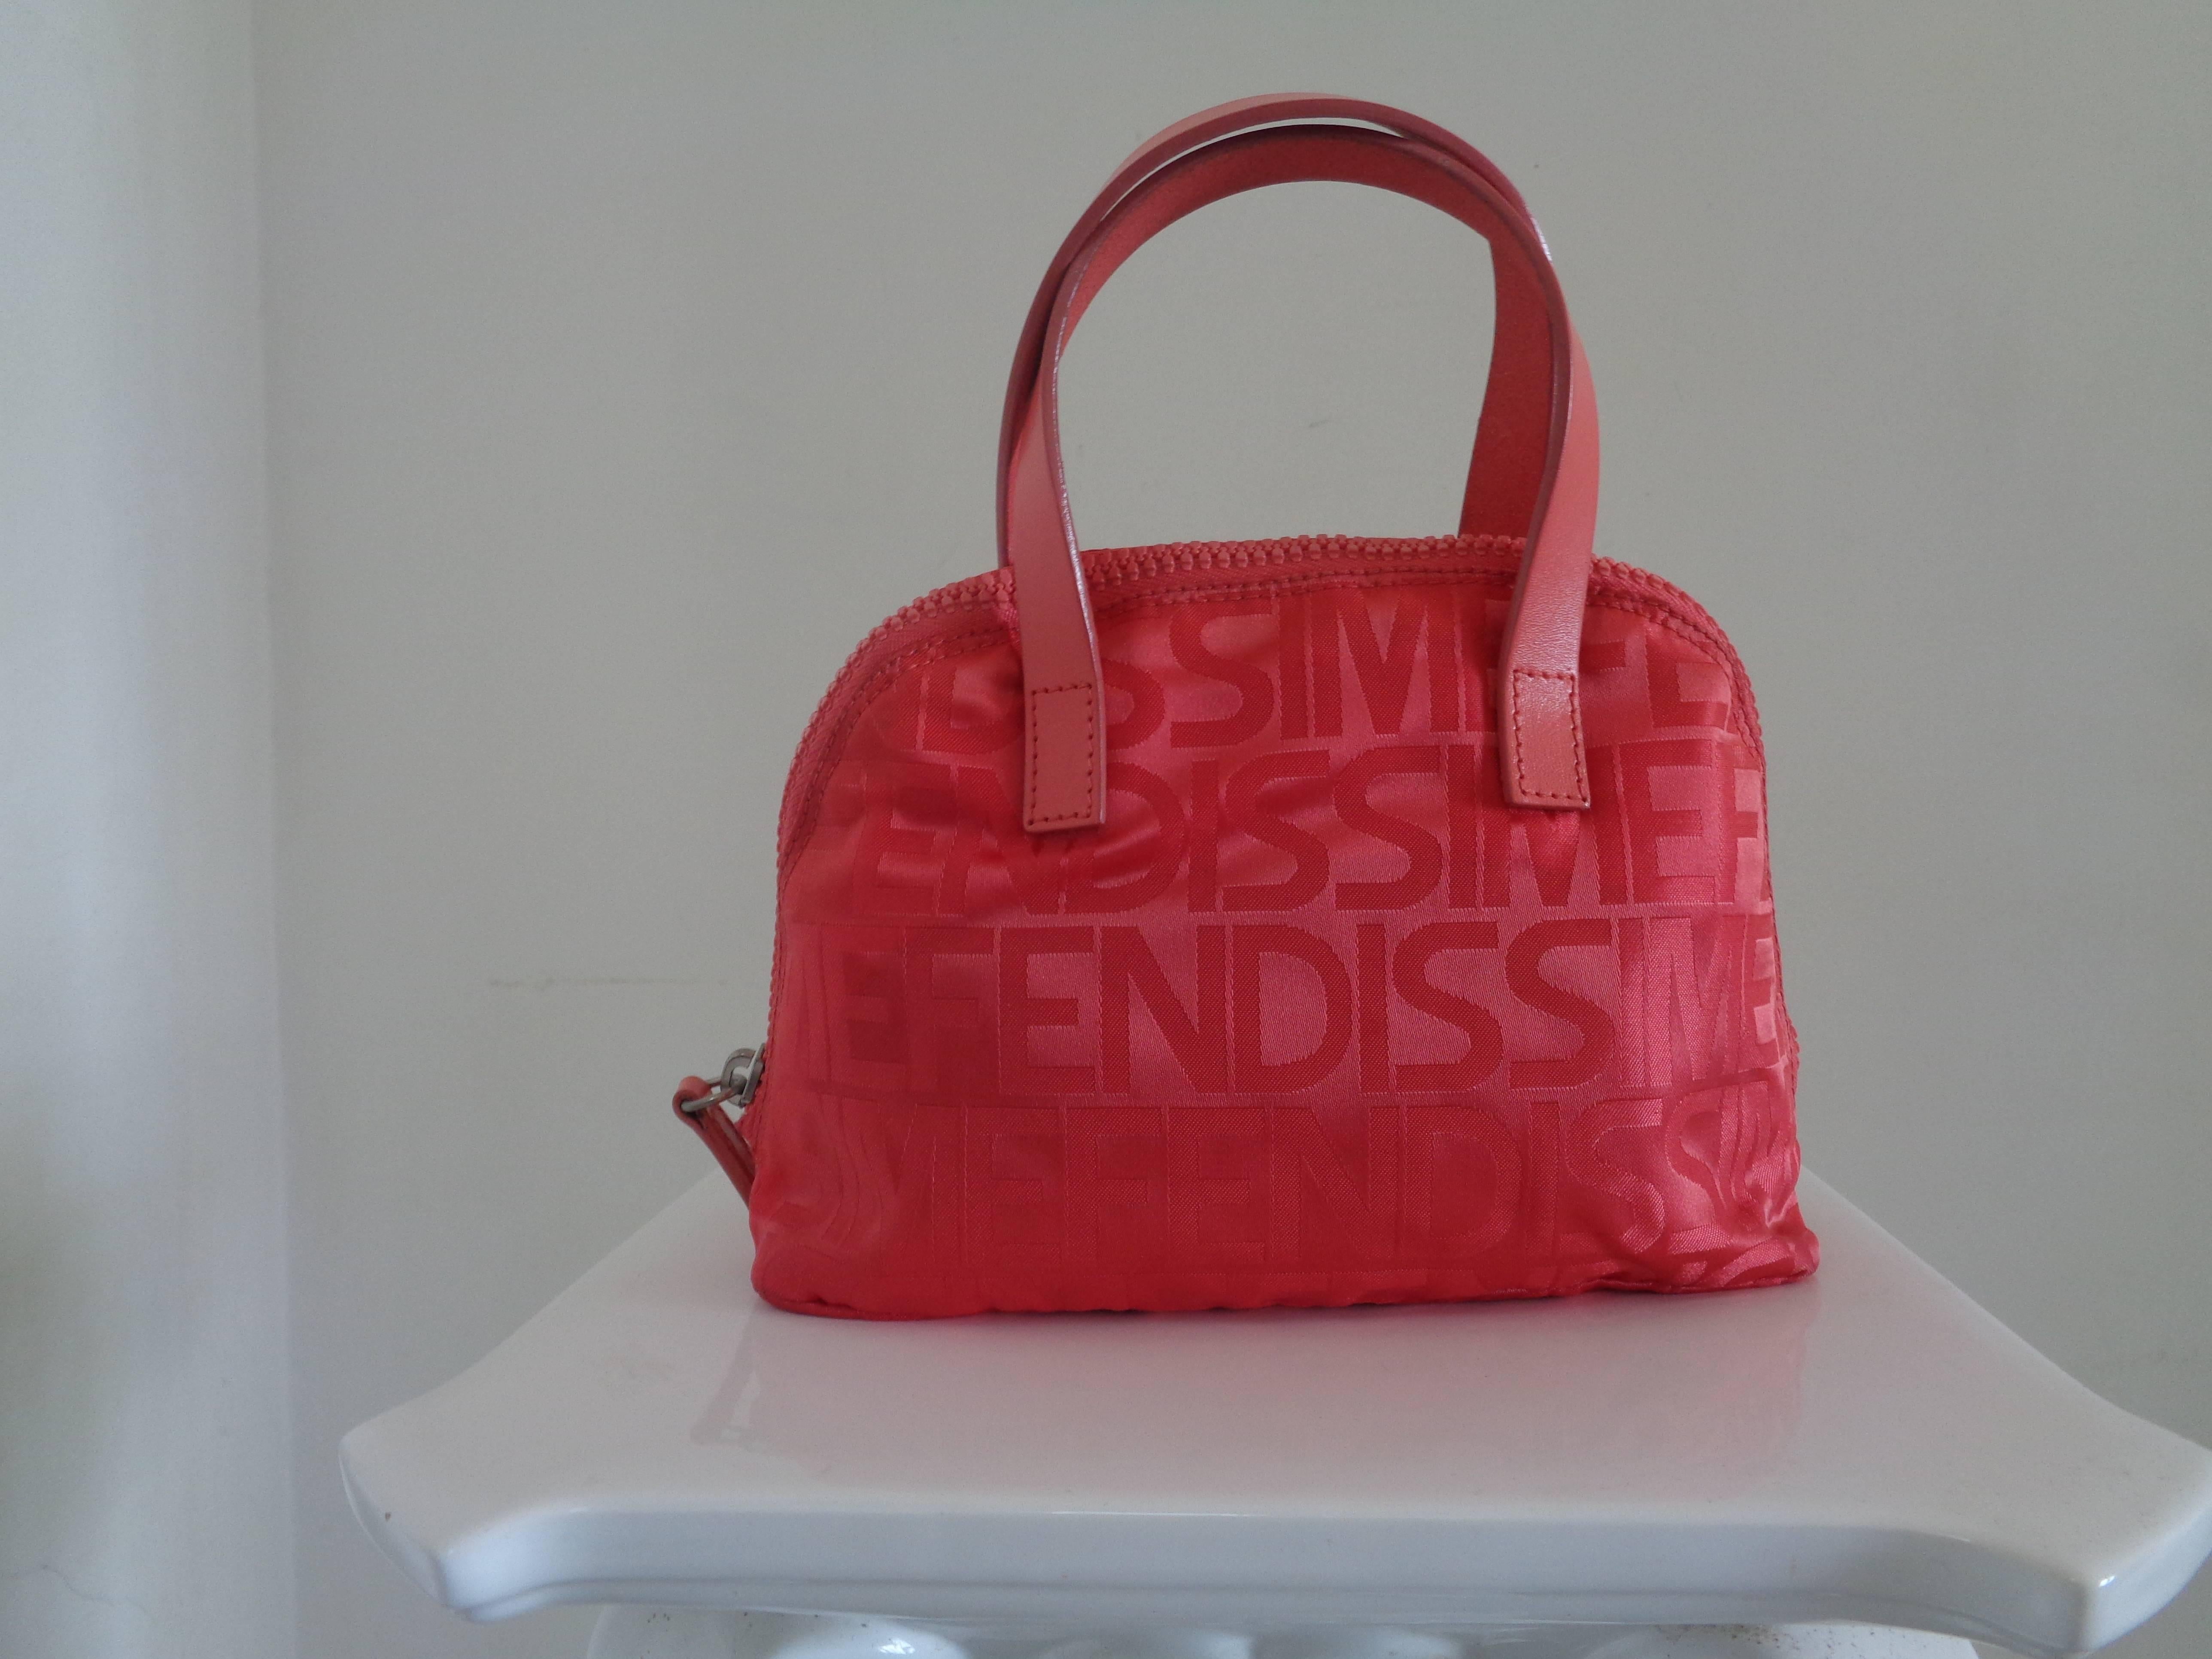 Fendi Accessories Pink Monogram Shoulder Bag

Totally made in italy